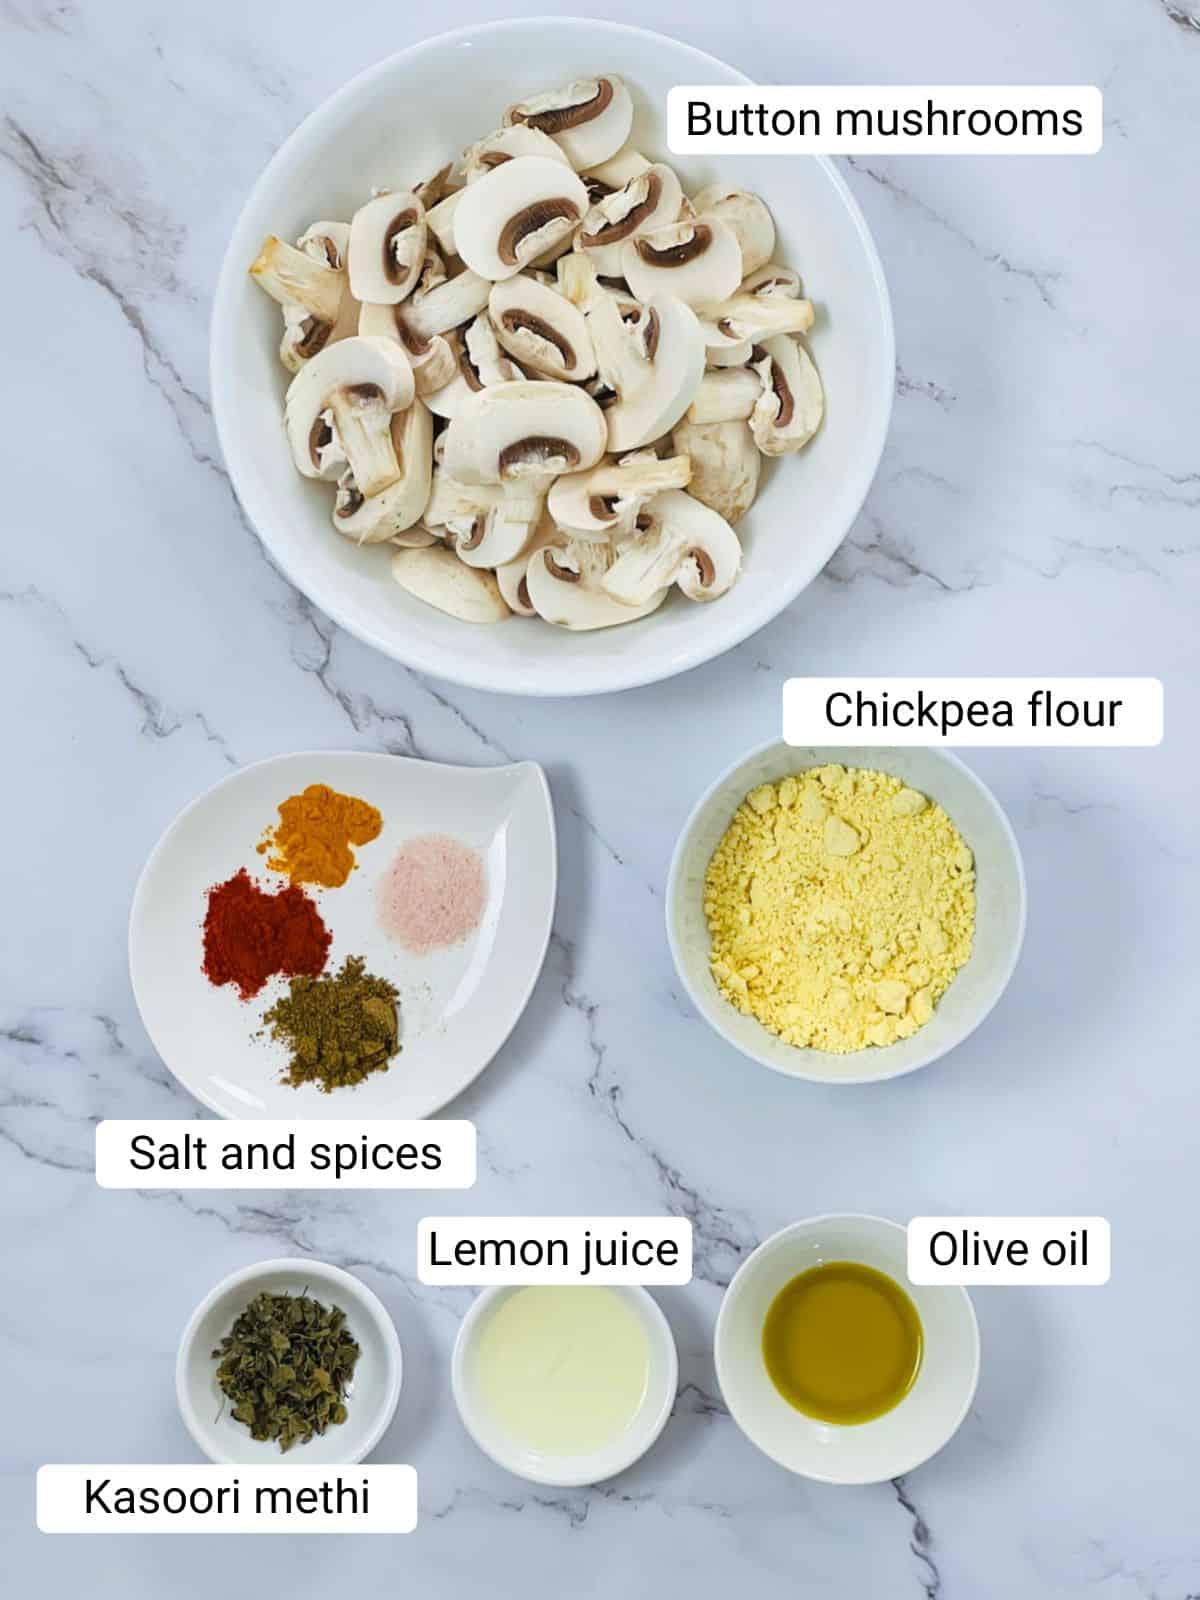 Ingredients to make air fryer tandoori mushroom placed on a marble surface.